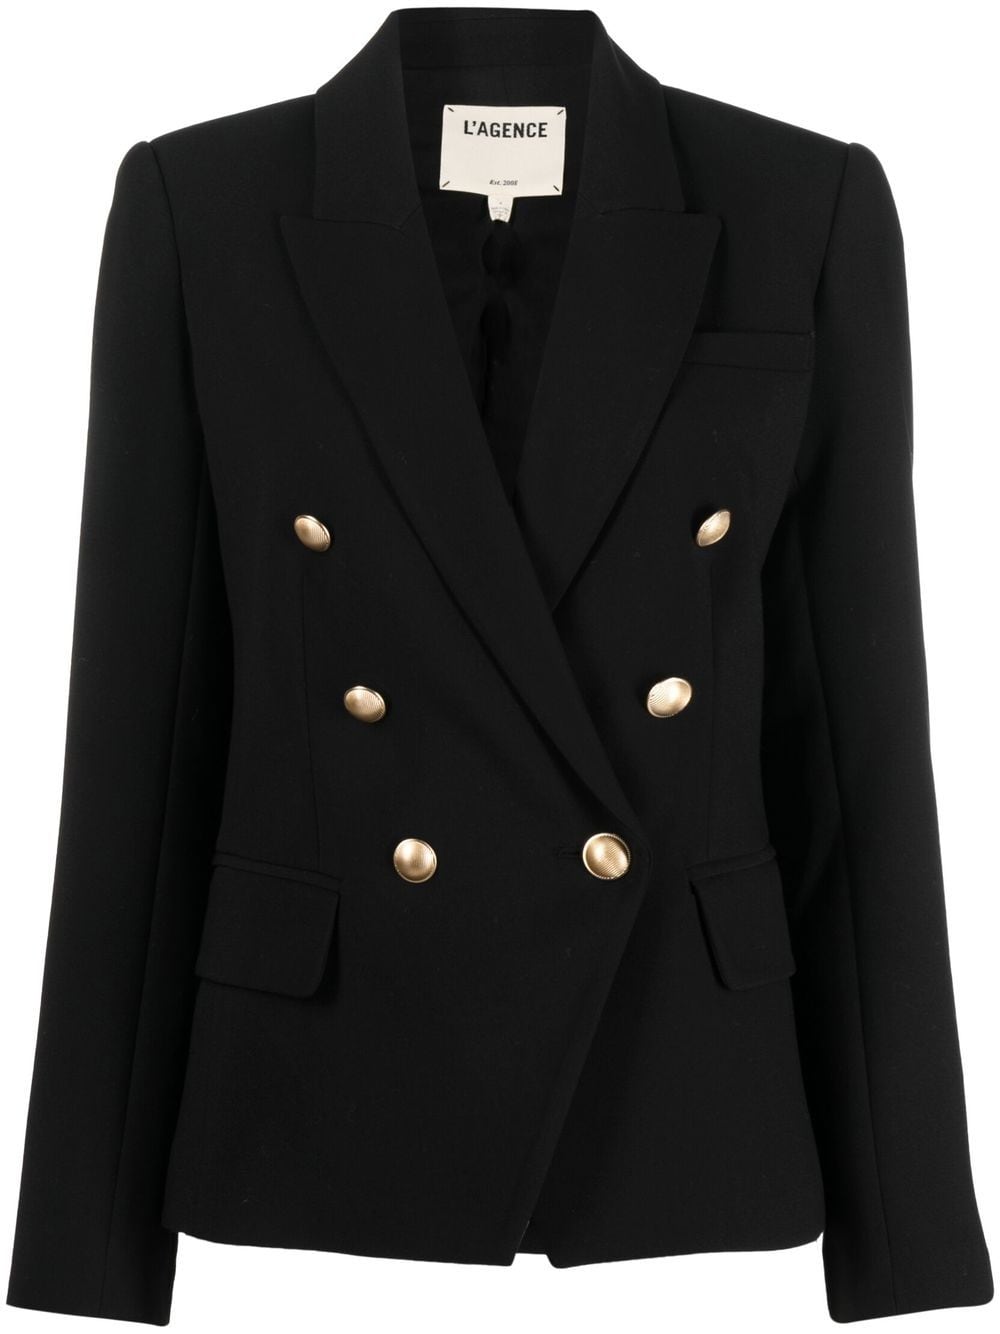 L'Agence double-breasted blazer - Black von L'Agence